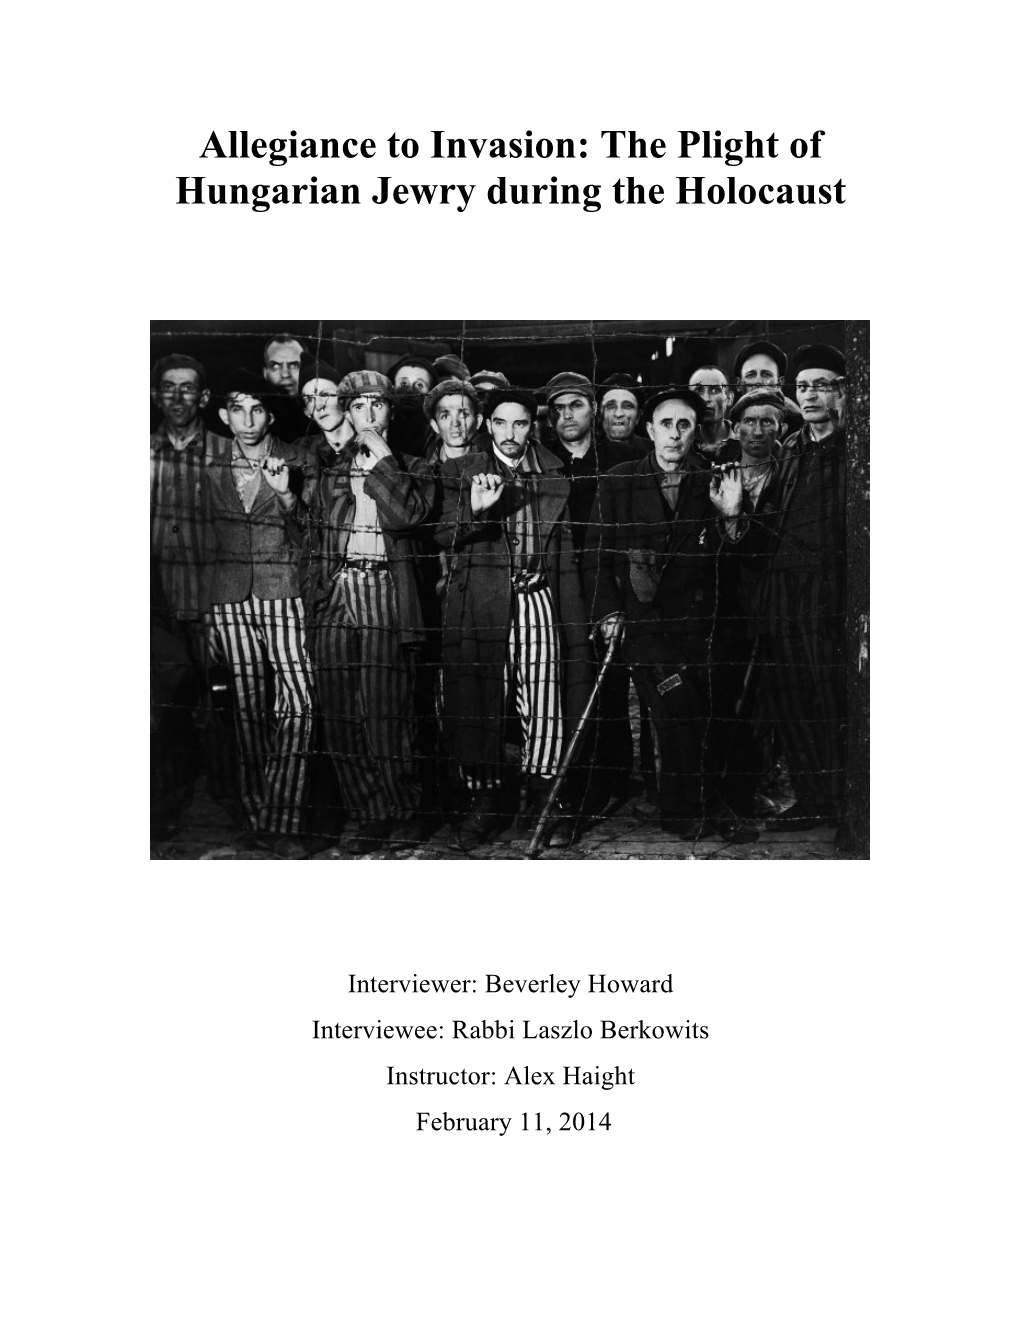 The Plight of Hungarian Jewry During the Holocaust